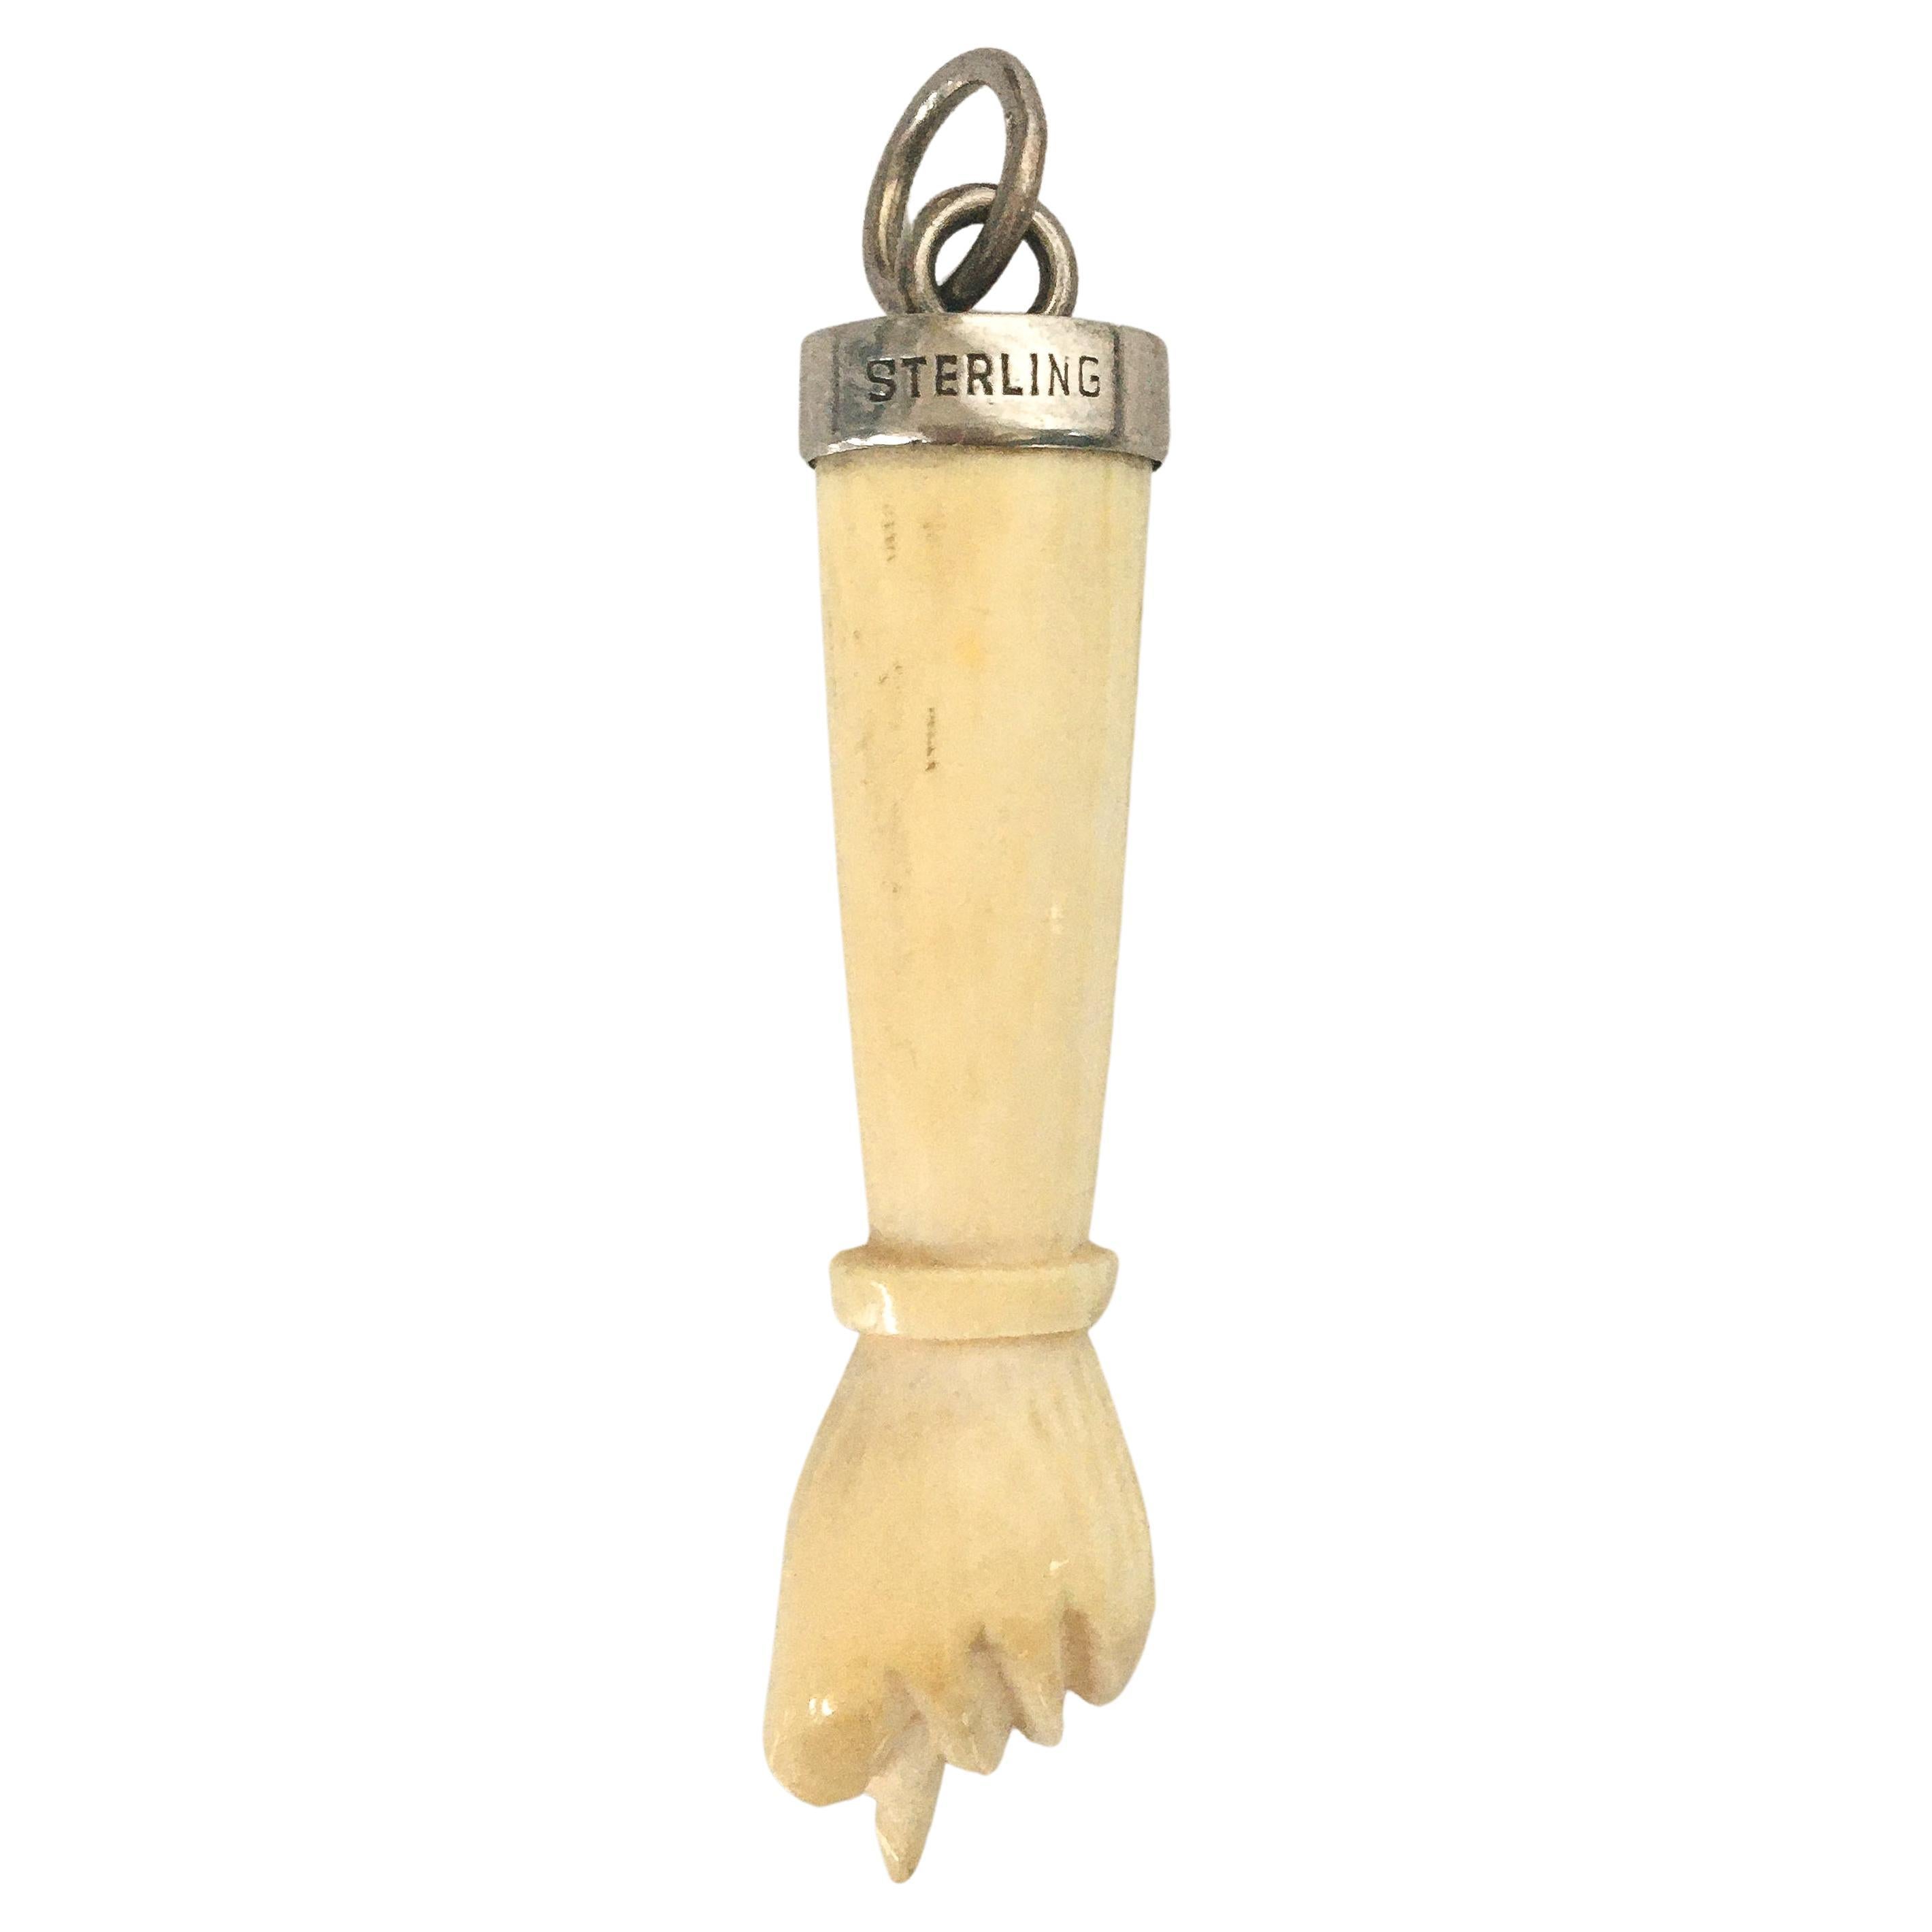 Figa Cow Bone Sterling Silver Amulet Charm Pendant For Sale